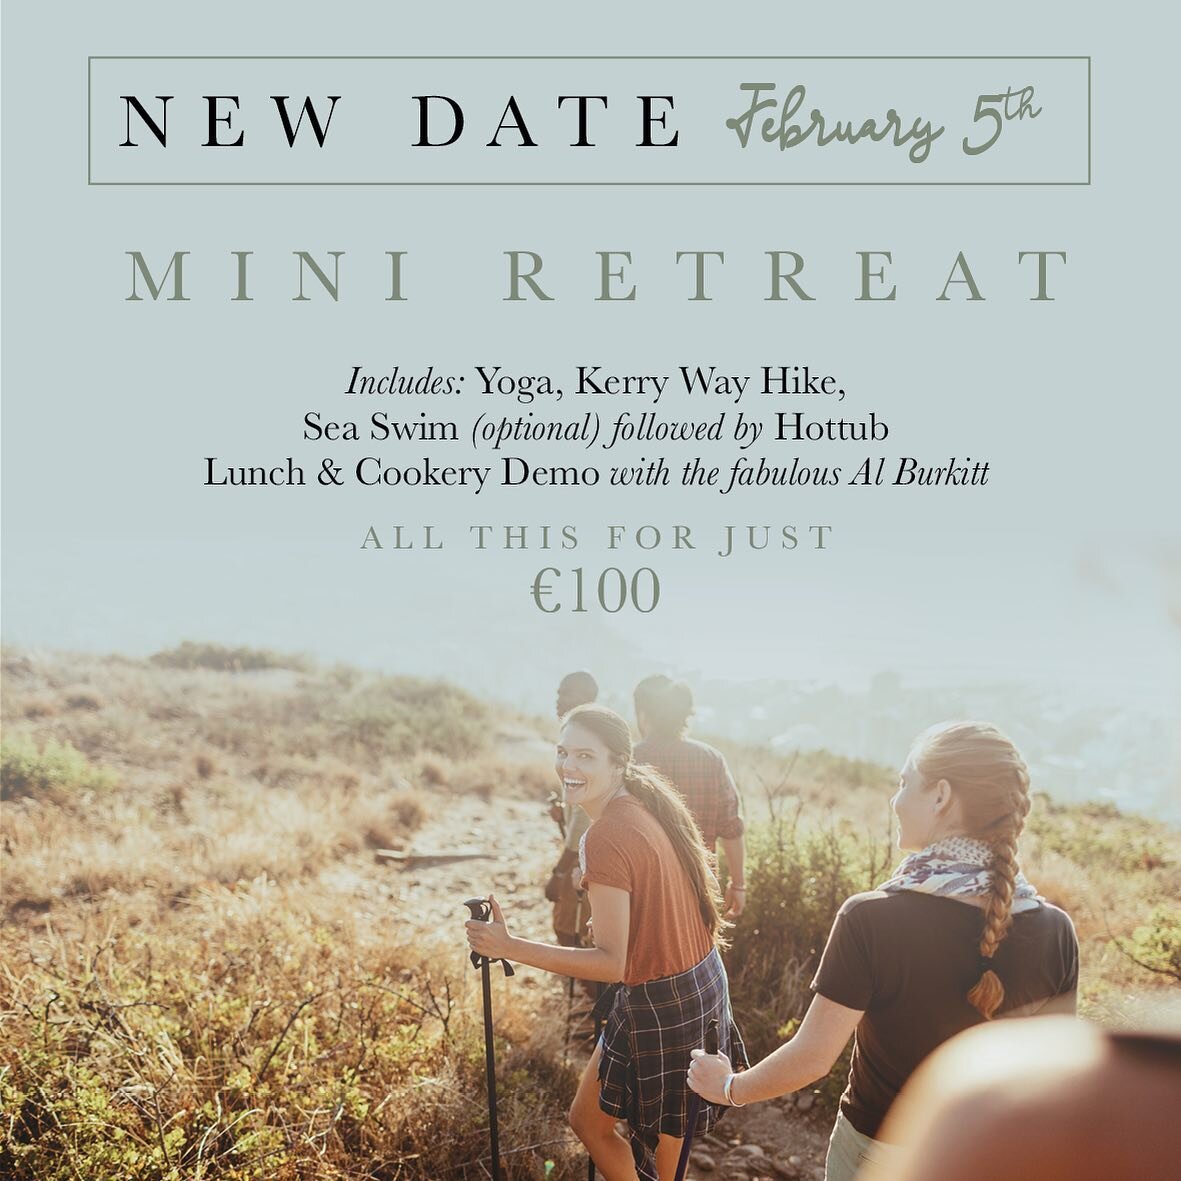 As our January 29th retreat sold out so quick we&rsquo;ve added another date ⭐️ please get booking fast to avoid disappointment! 

New Date ⭐️ February 5th ⭐️